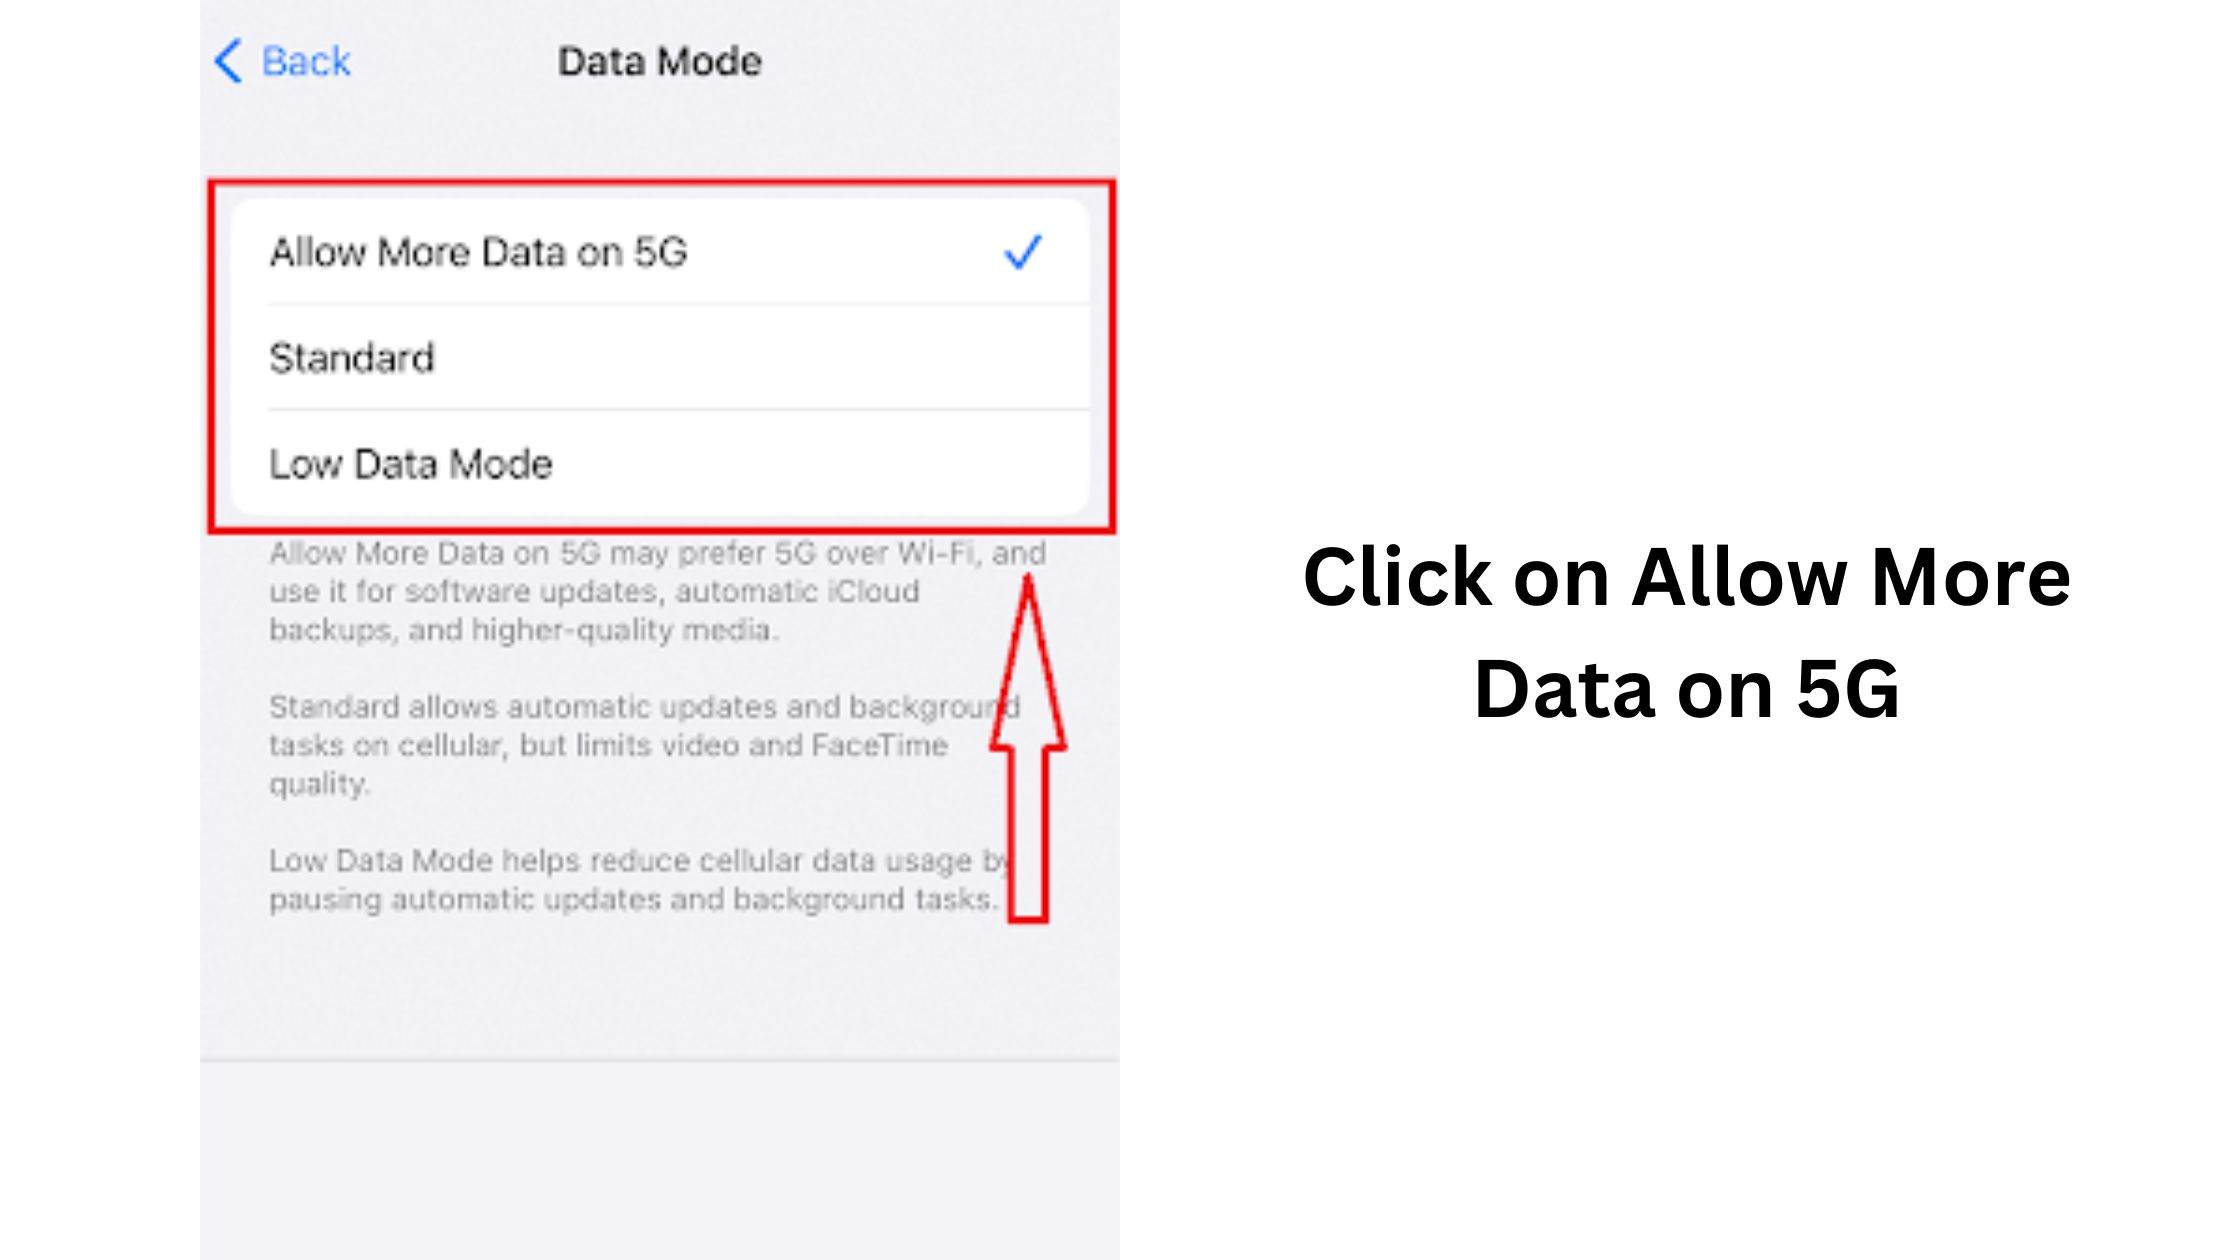 finally click on Allow More Data on 5G for activate Airtel 5G data plan on iPhone